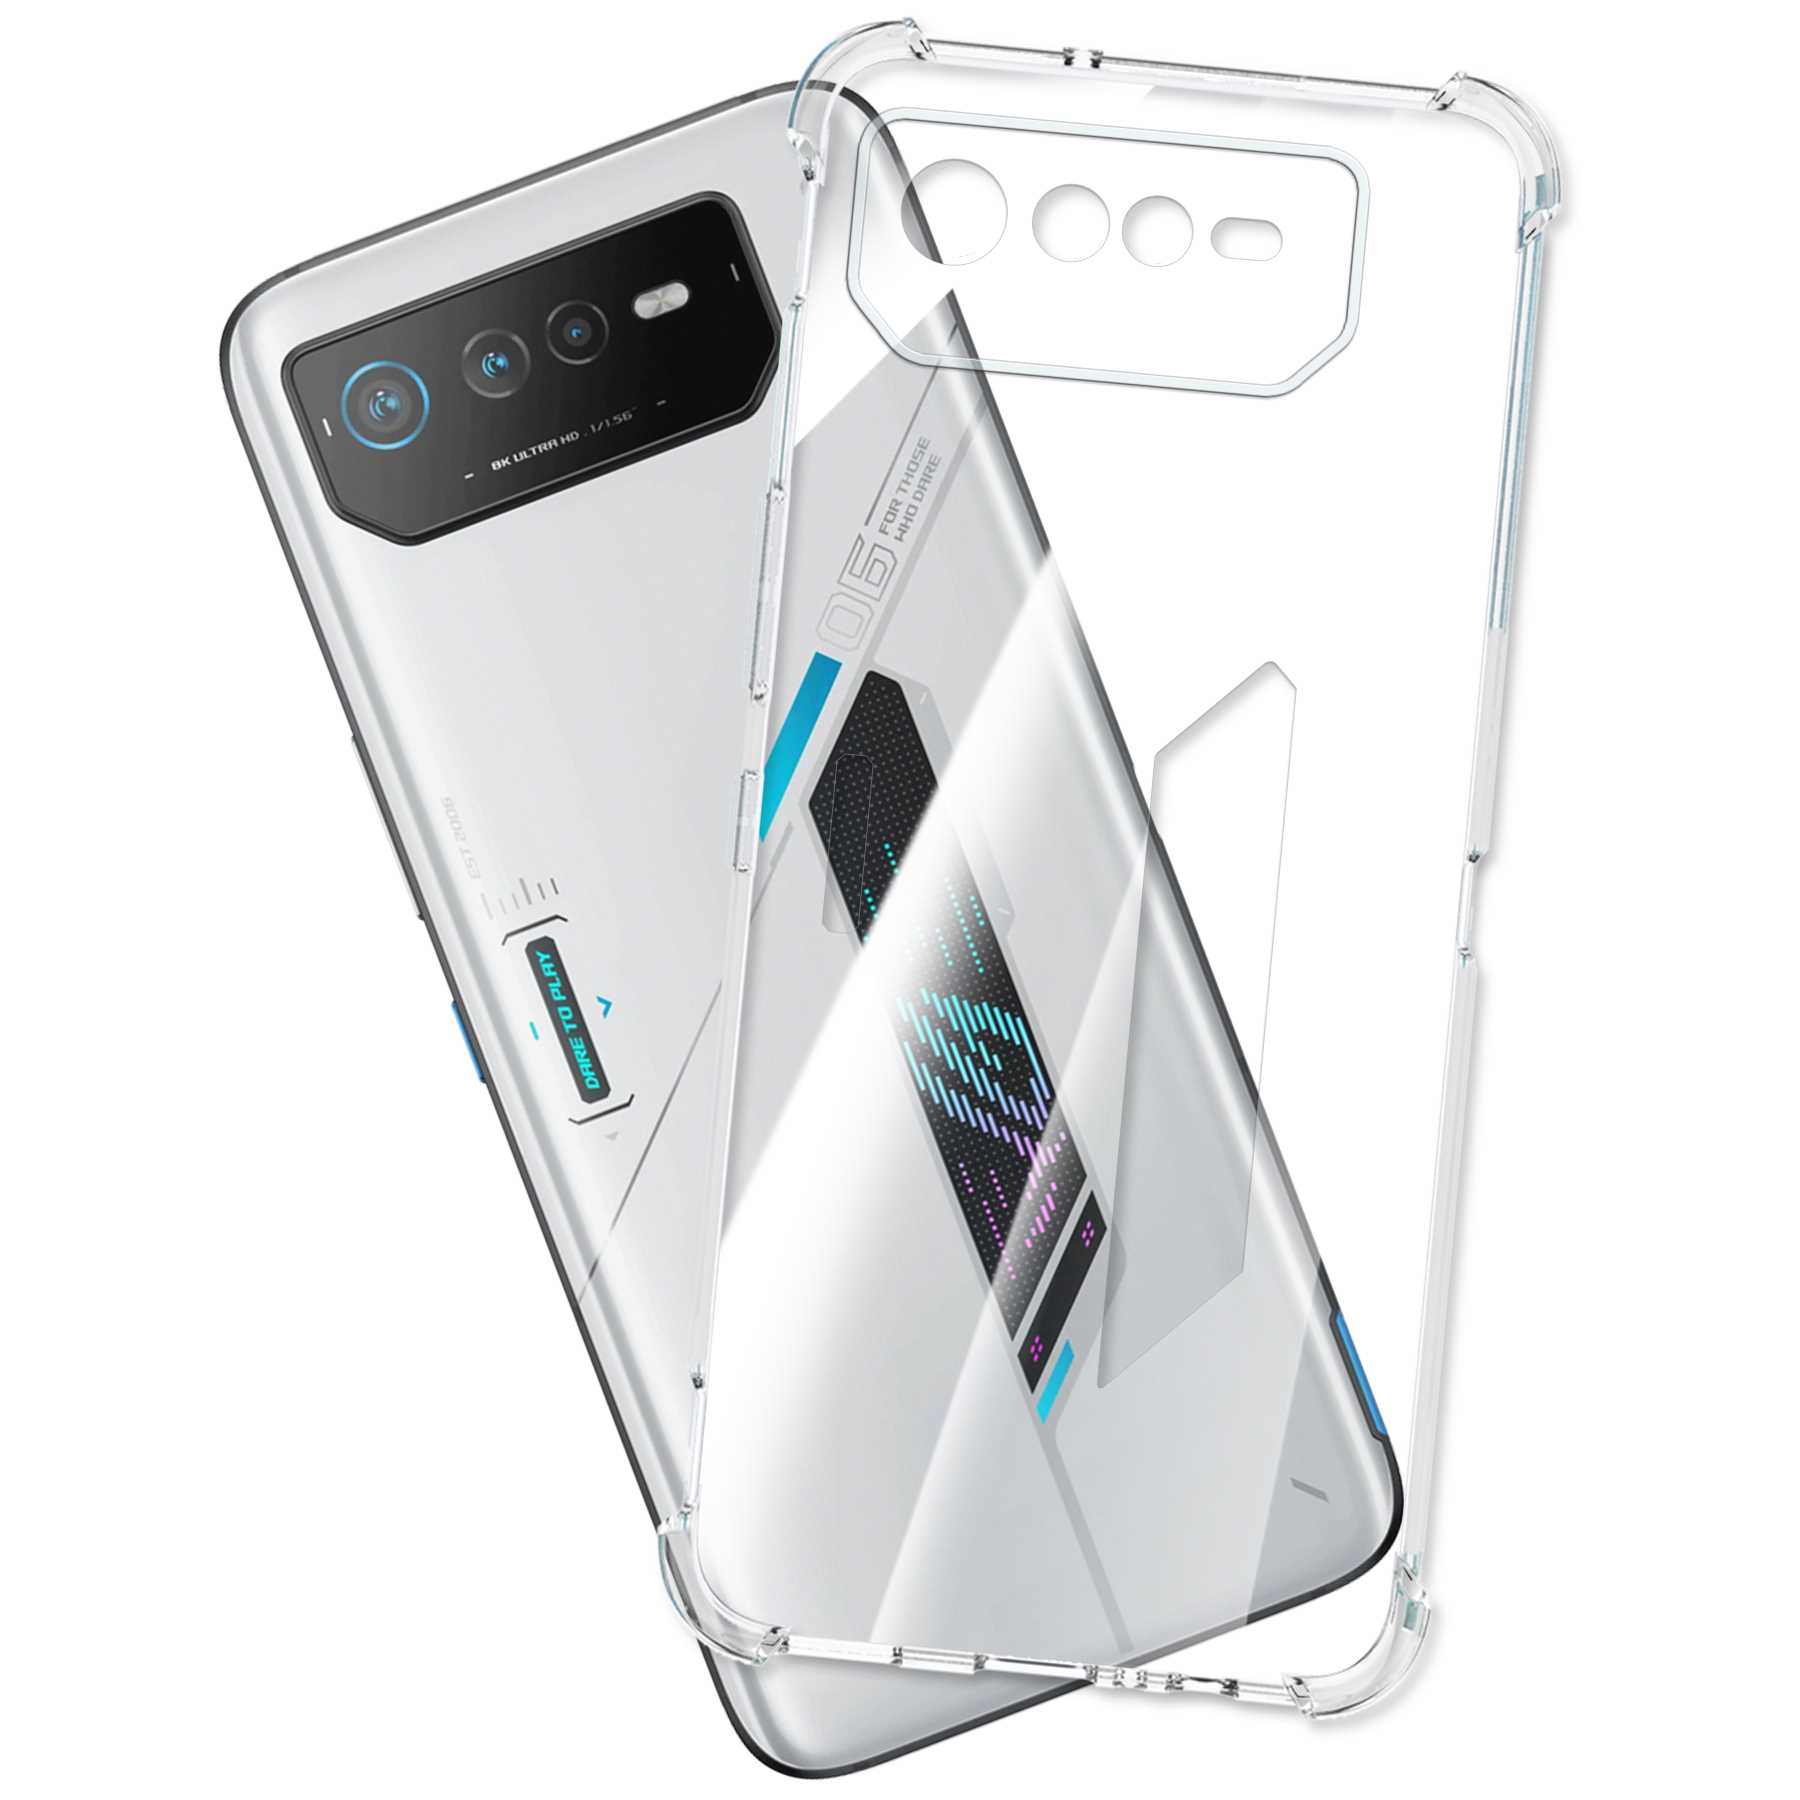 Backcover, 6D, Phone ENERGY MORE Case, Armor Clear Transparent Asus, 6, MTB ROG